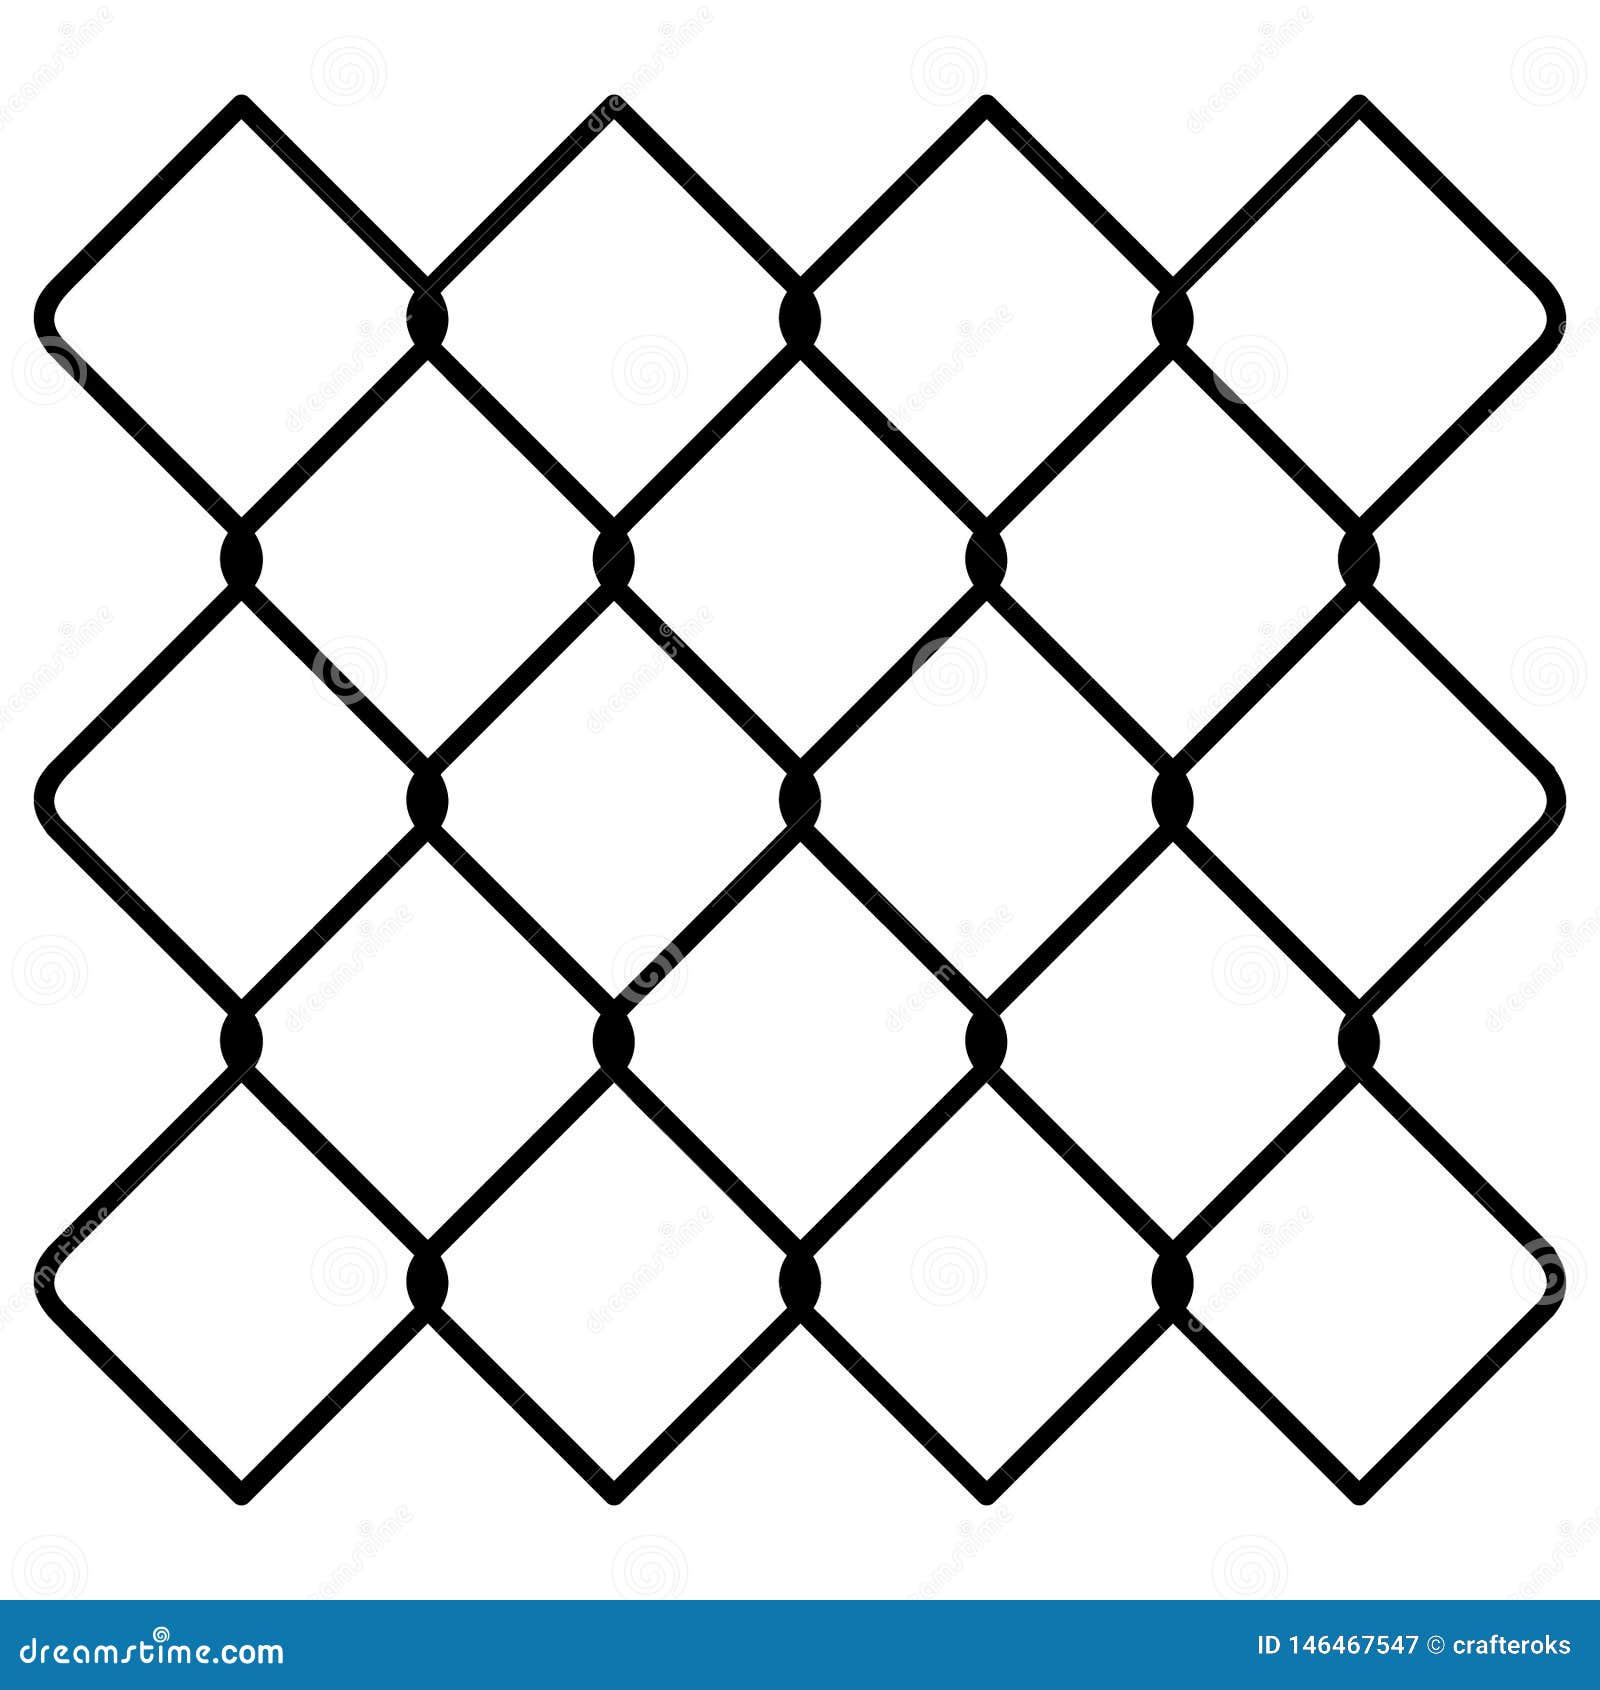 chain link fence hand drawn crafteroks svg free, free svg file, eps, dxf, , logo, silhouette, icon, instant download, digita